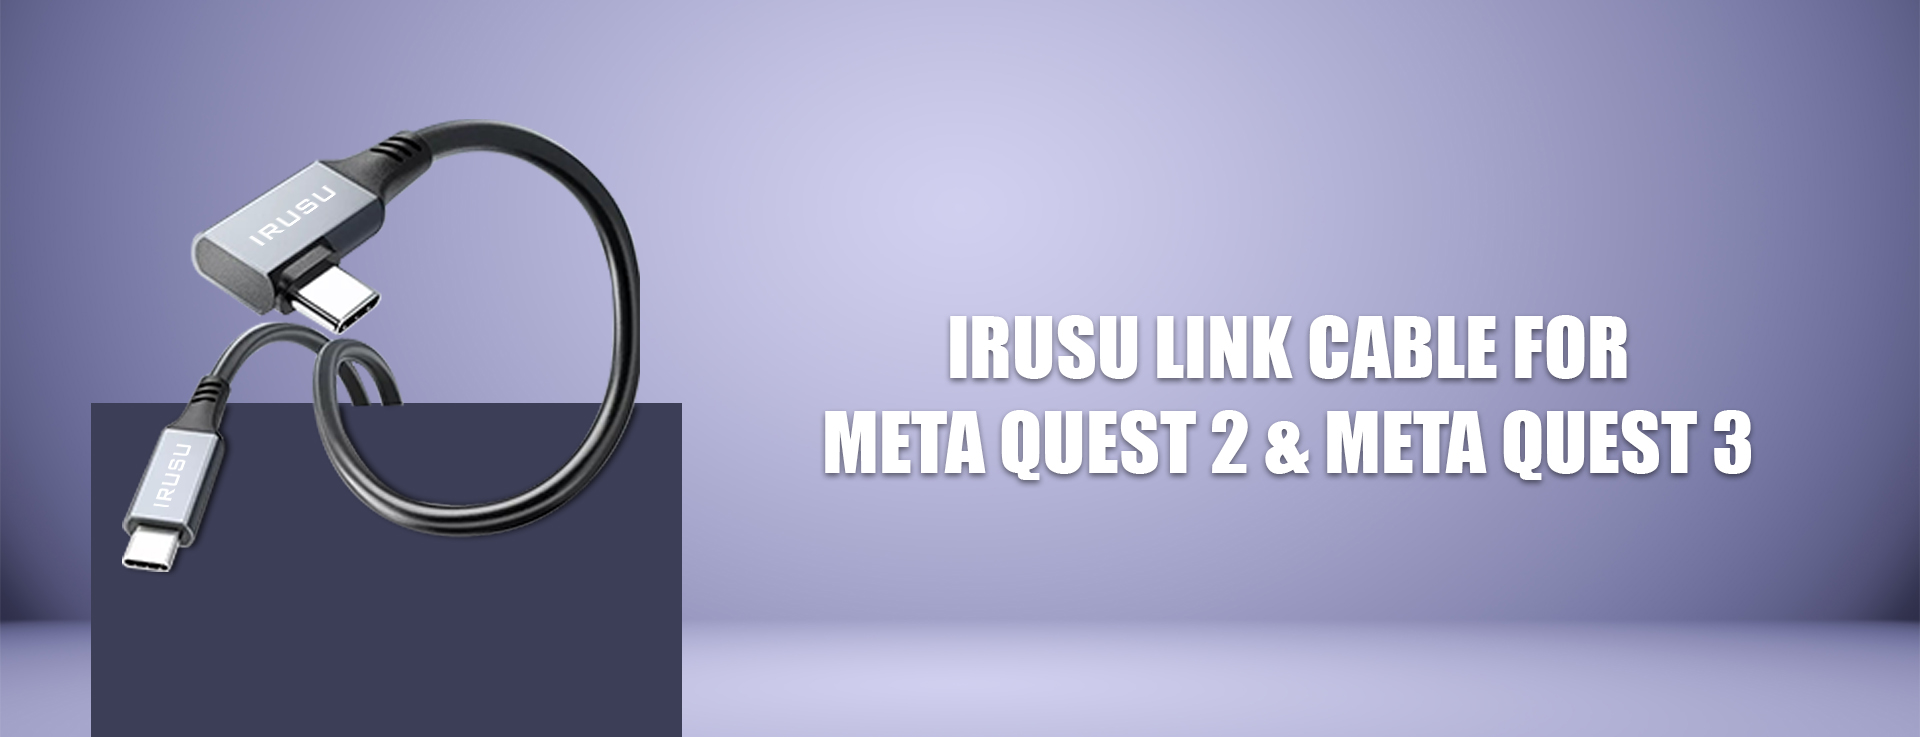 The Irusu Link Cable for Oculus Quest 2 & Meta Quest 3 